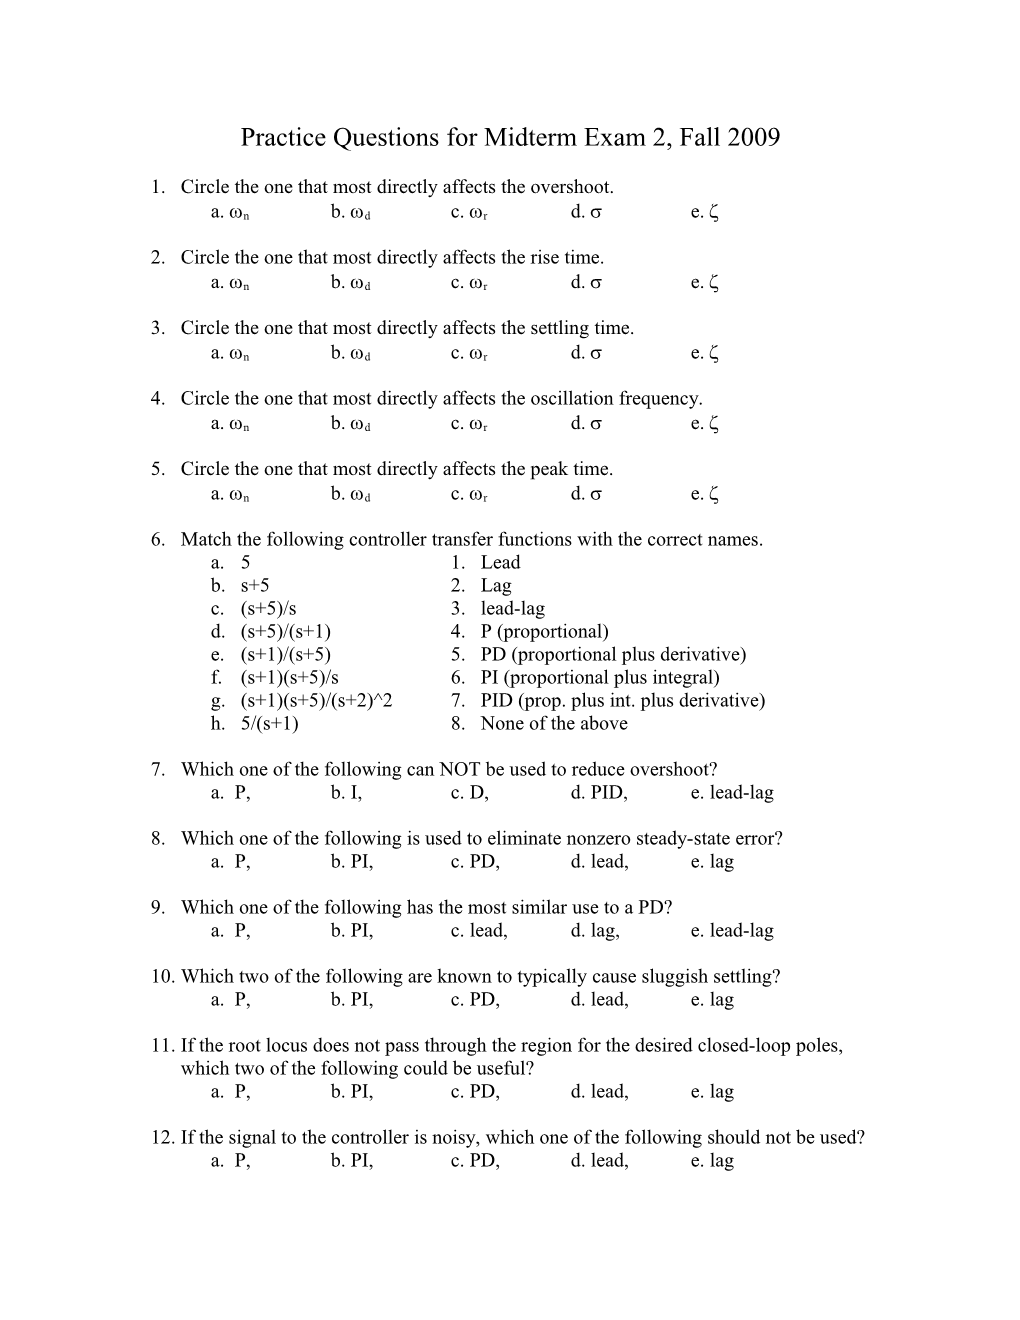 Practice Questions for Midterm Exam 2, Fall 2009